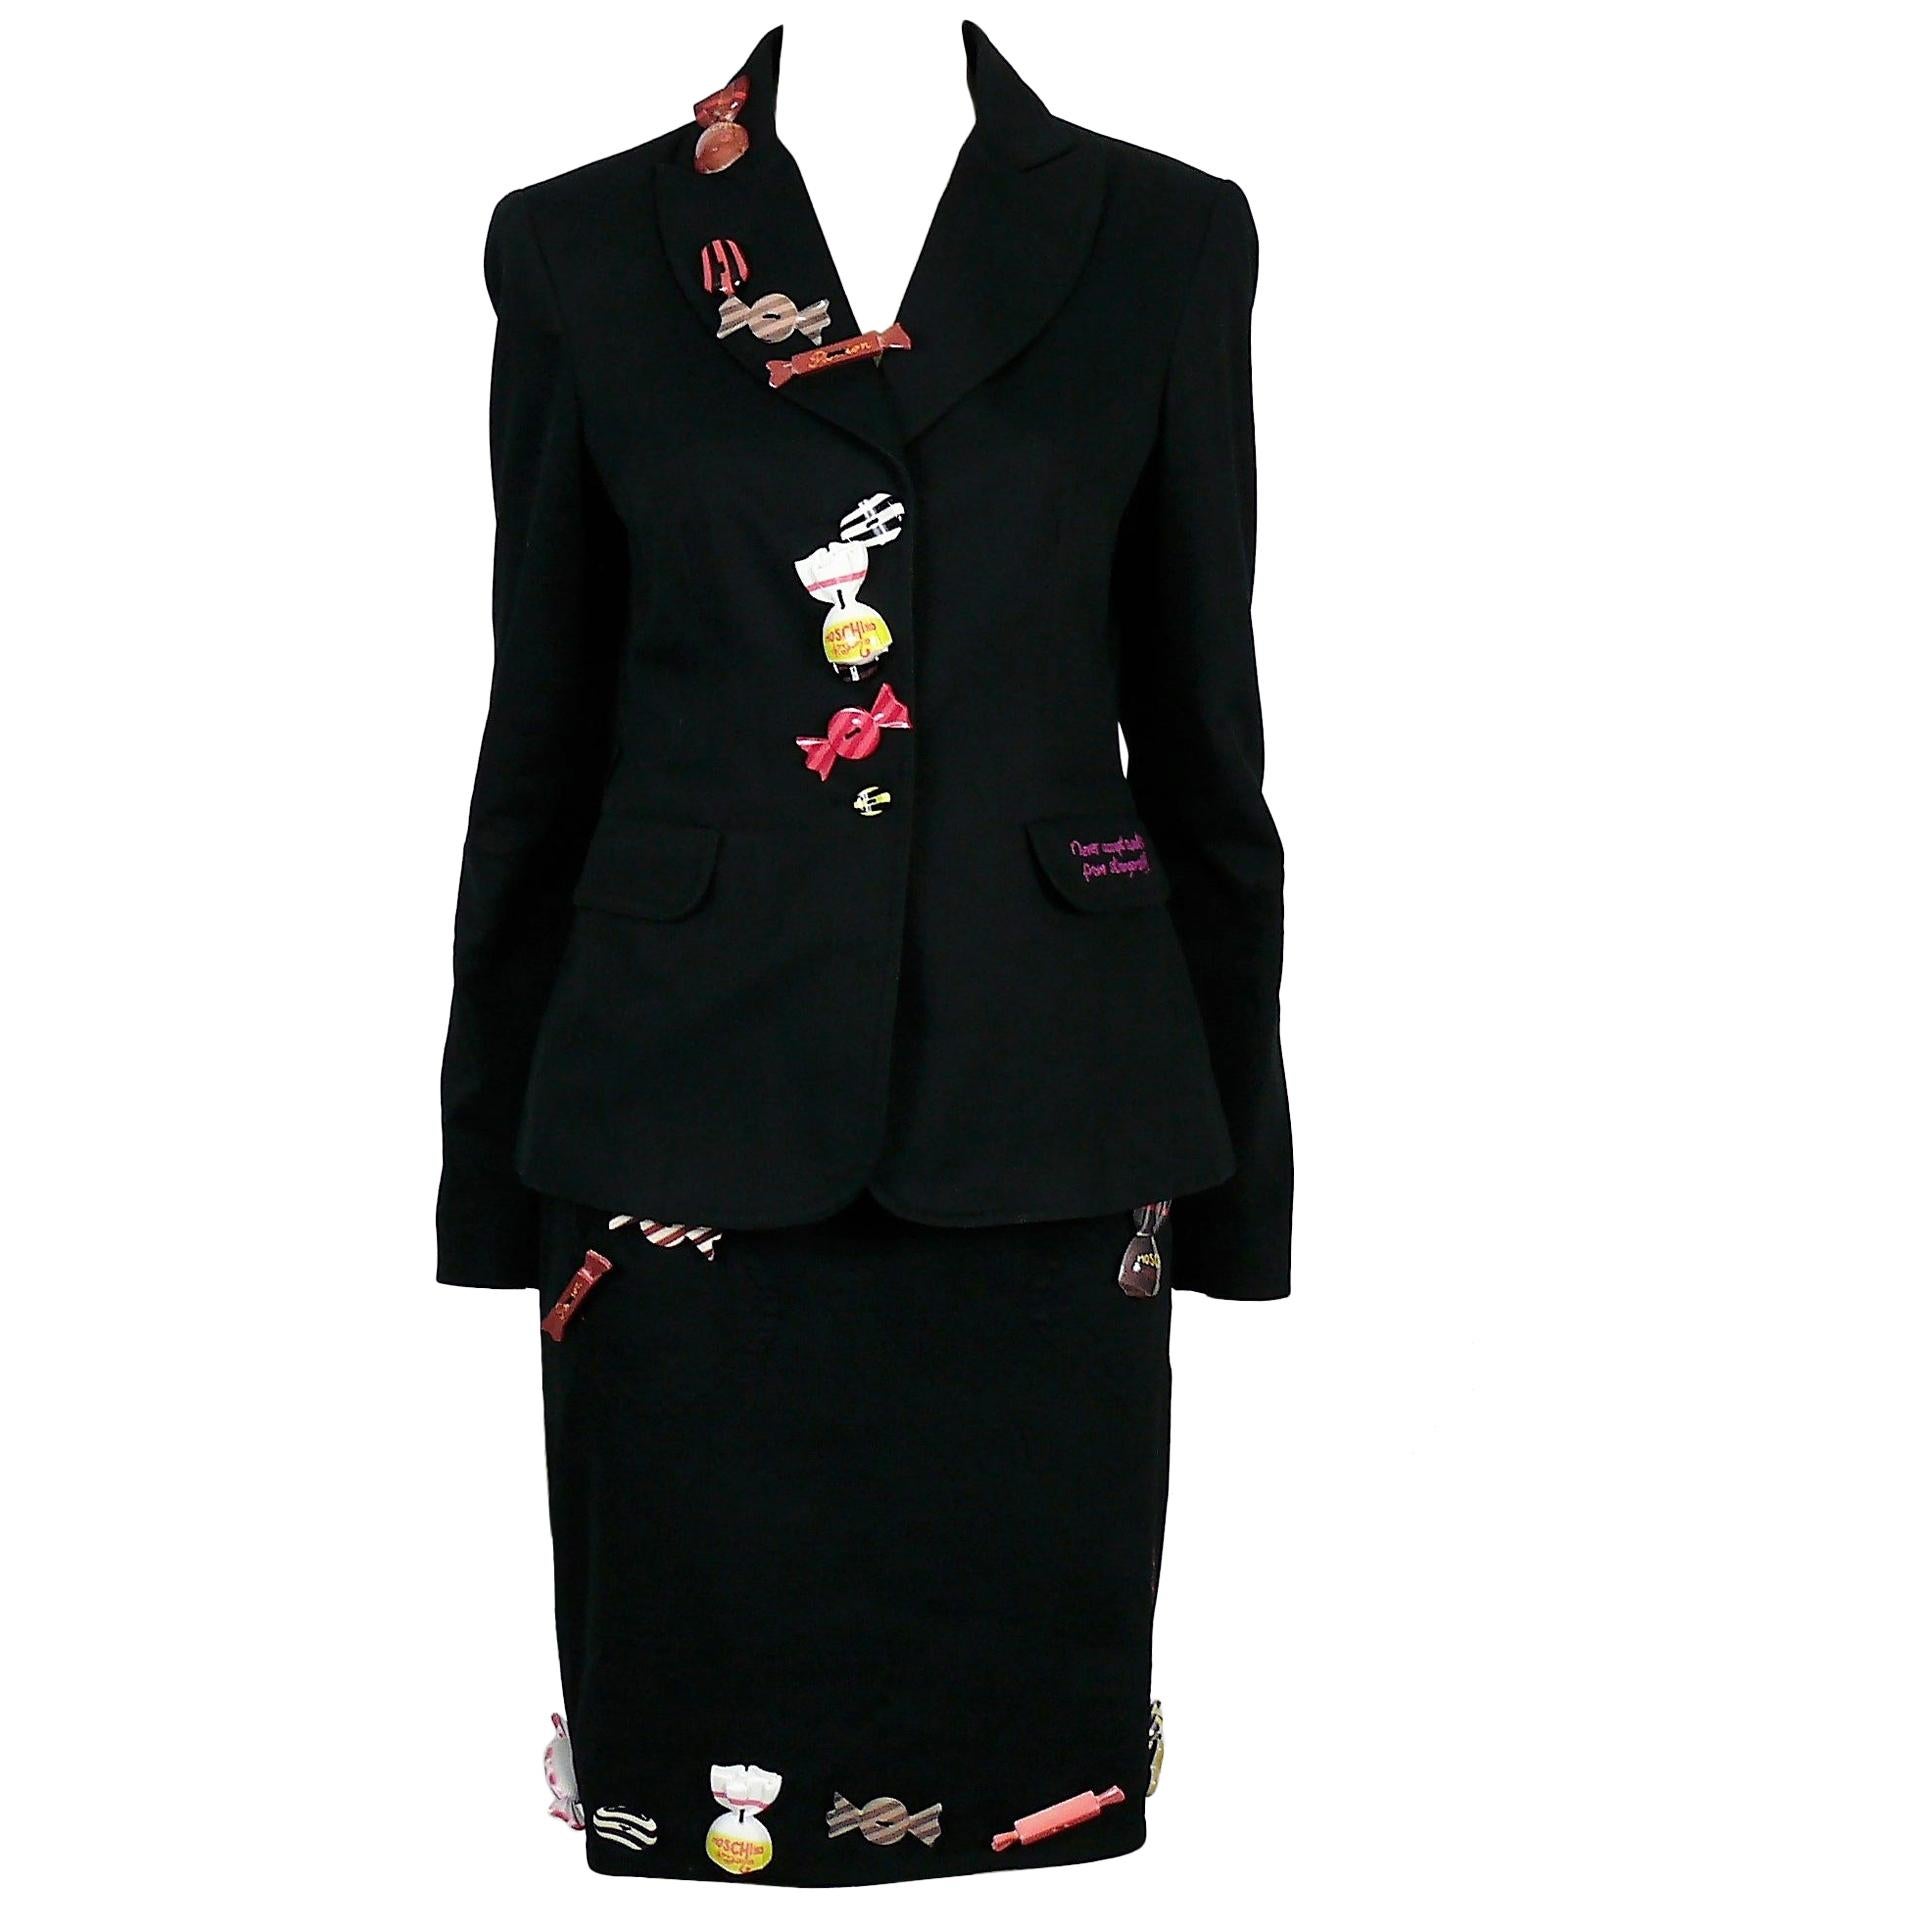 Moschino "Never Accept Sweets from Strangers" Candy Embellished Blazer and Skirt